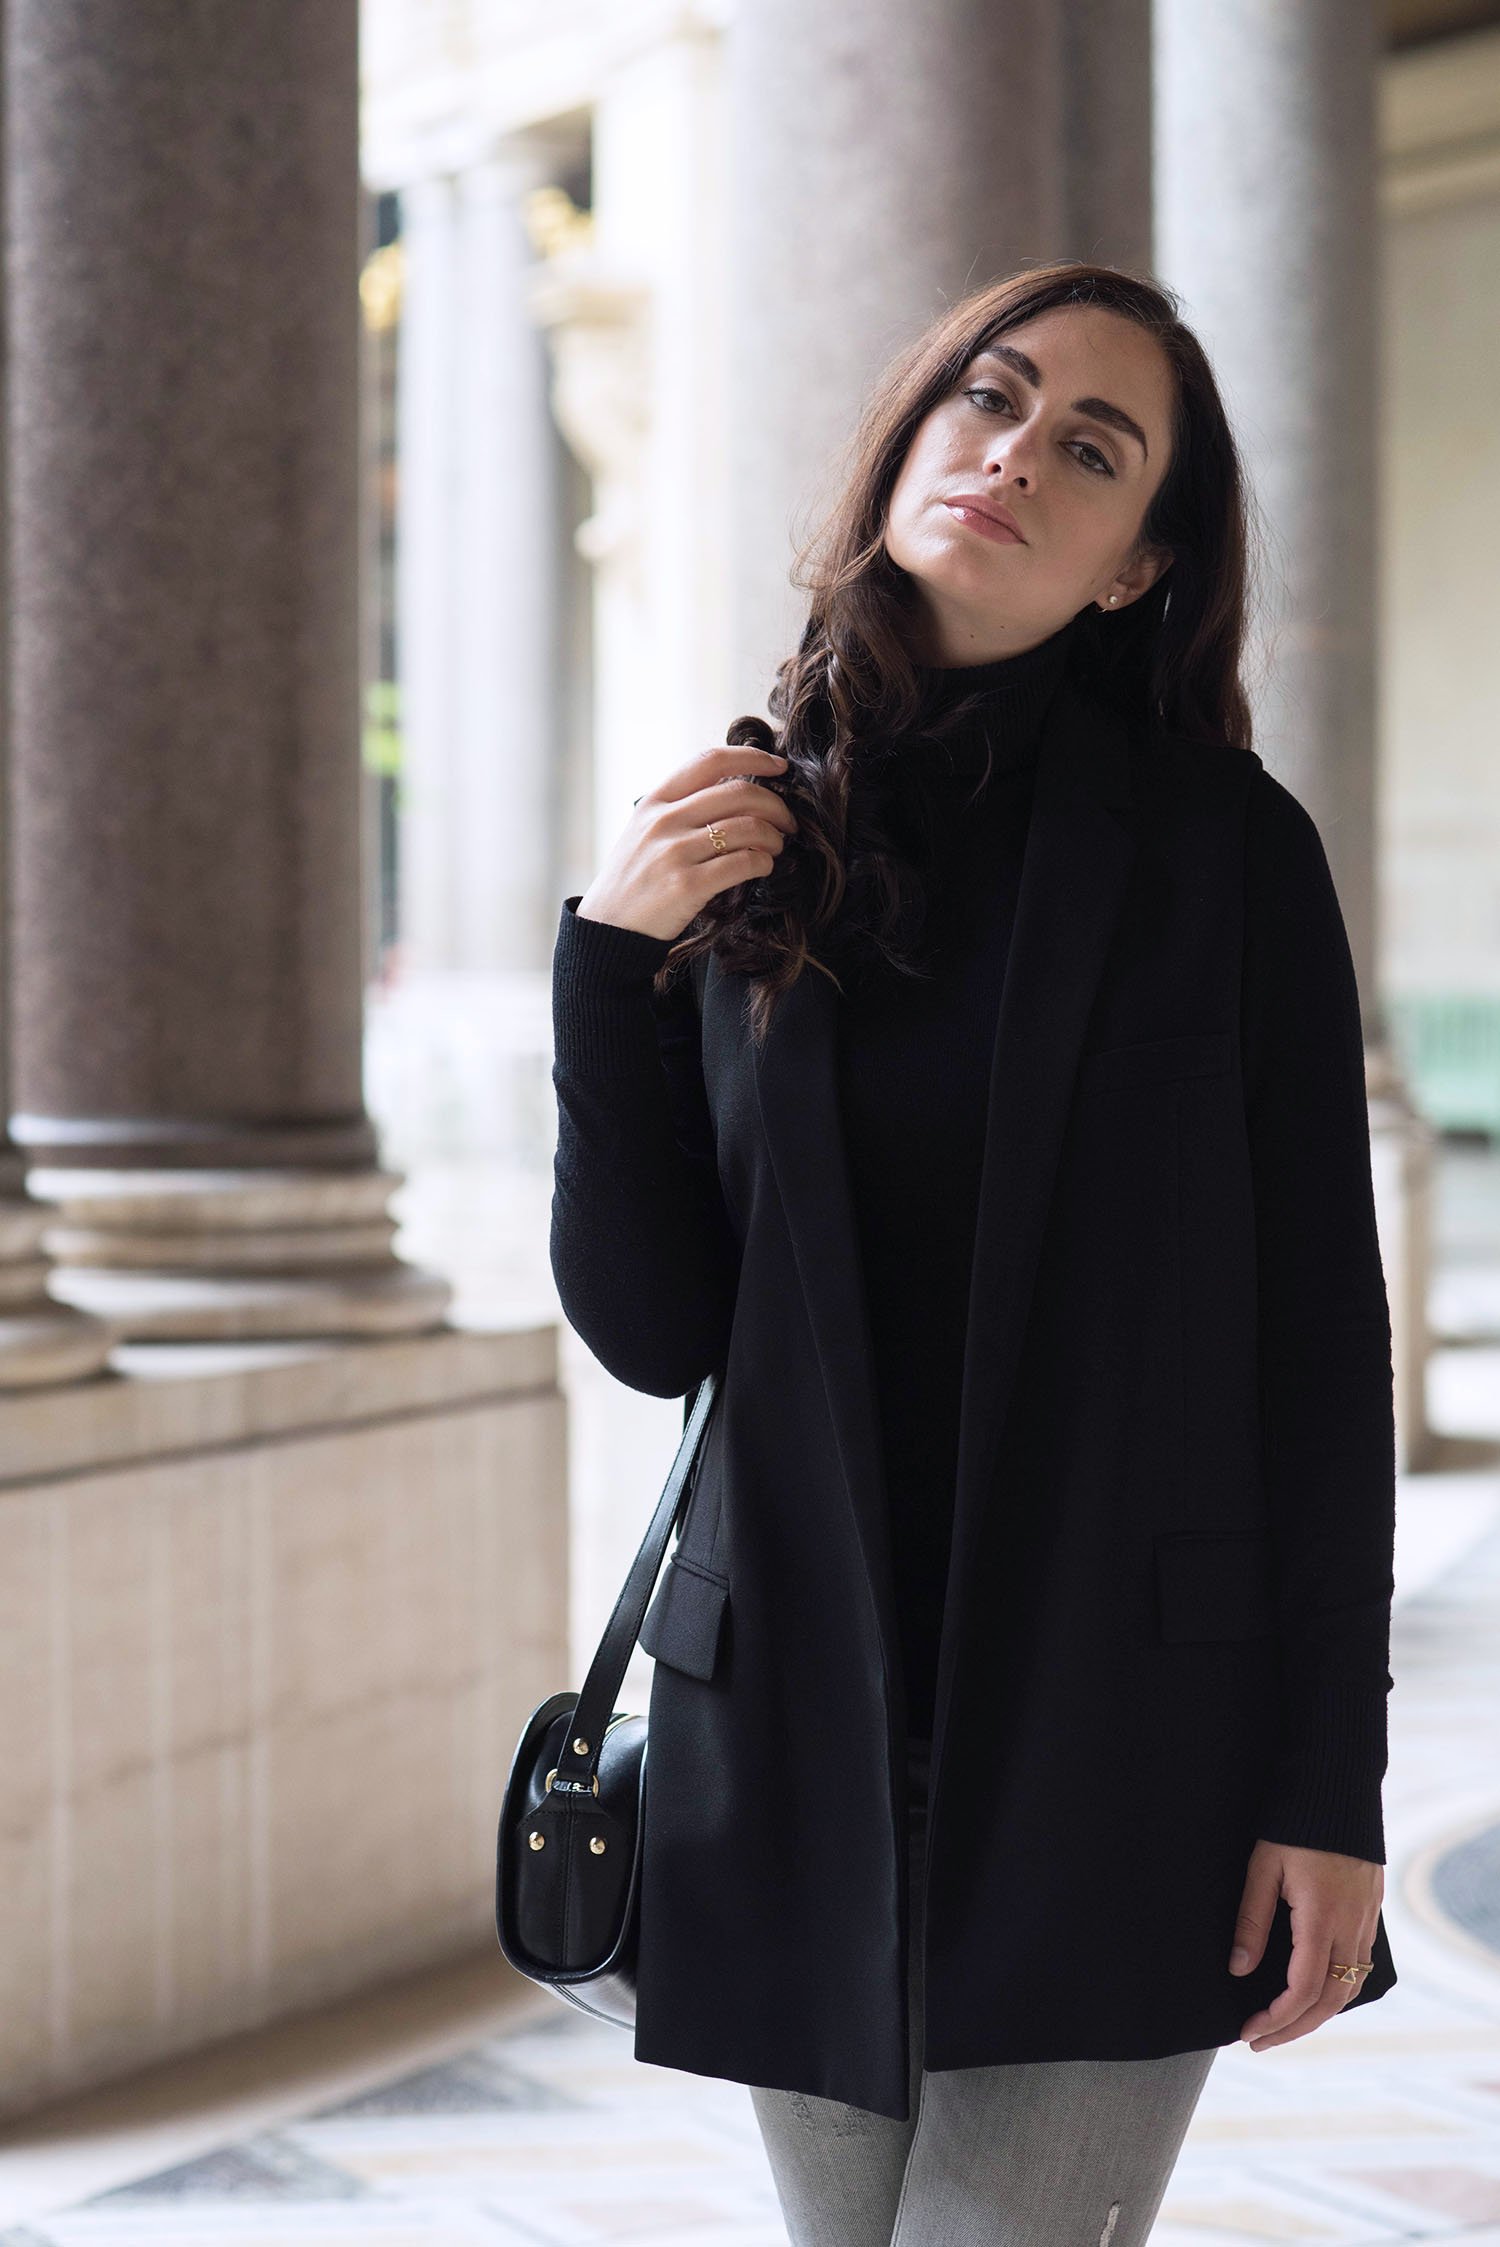 Portrait of Winnipeg fashion blogger Cee Fardoe of Coco & Vera at the Petit Palais in Paris wearing a black Zara vest and carrying and APC halfmoon bag